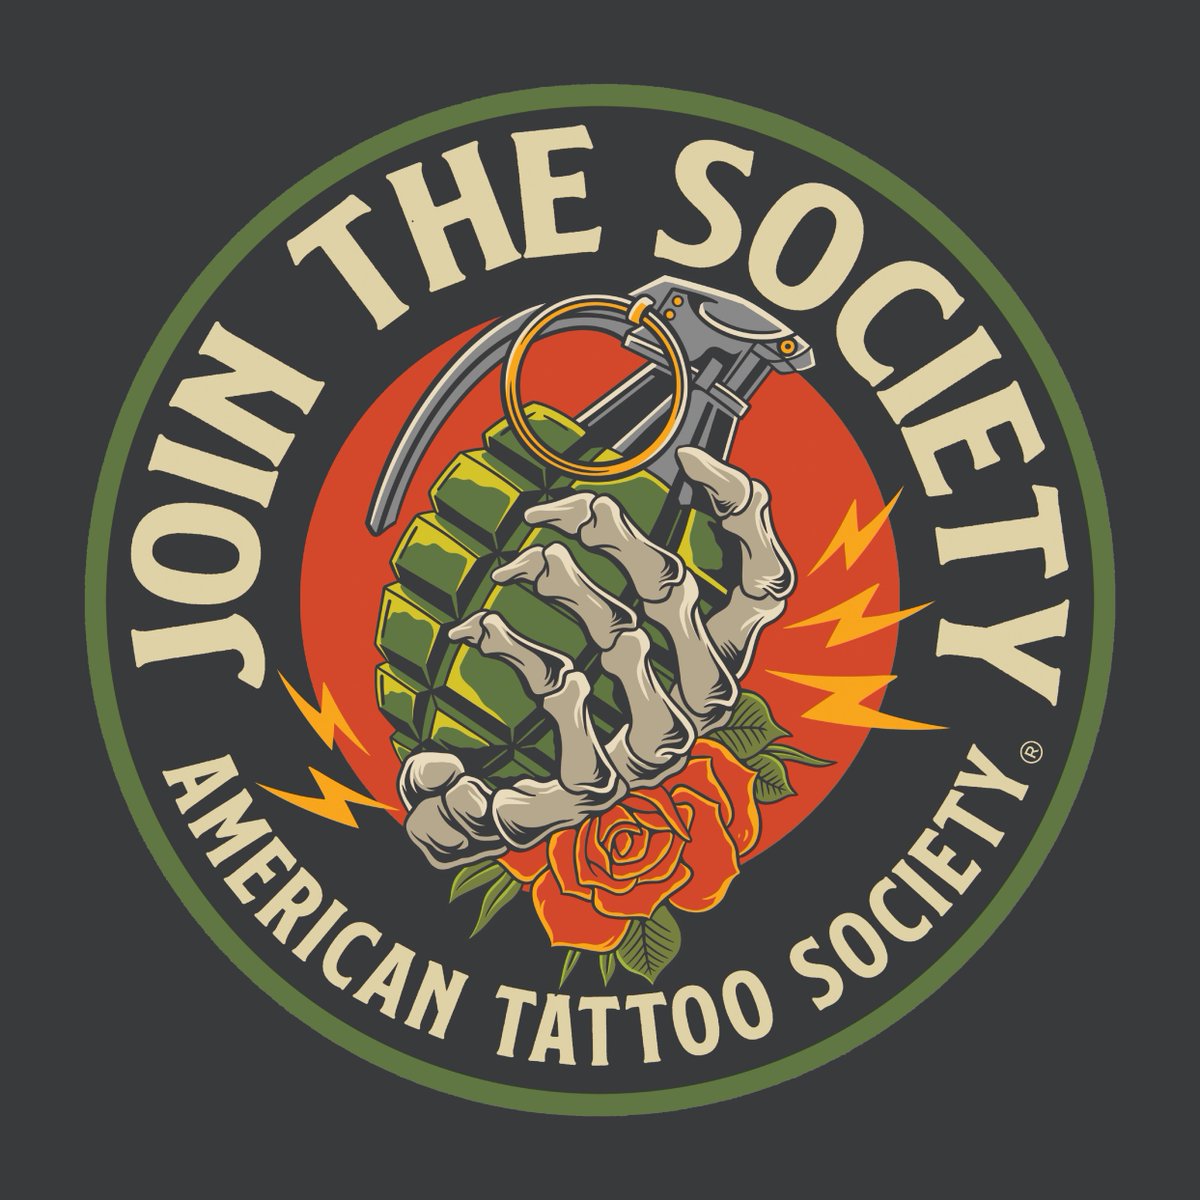 Join the Society.

#americantattoosocietyoffayetteville #americantattoosociety #fayetteville #fayettevillenc #ftbragg #ftbraggnc #fortbraggnc #fortbragg #82ndairborne #militarytattoos #tattooedmilitary #tattoo #piercing #tattoosociety #saniderm #afterinked

Call us at 910-867...